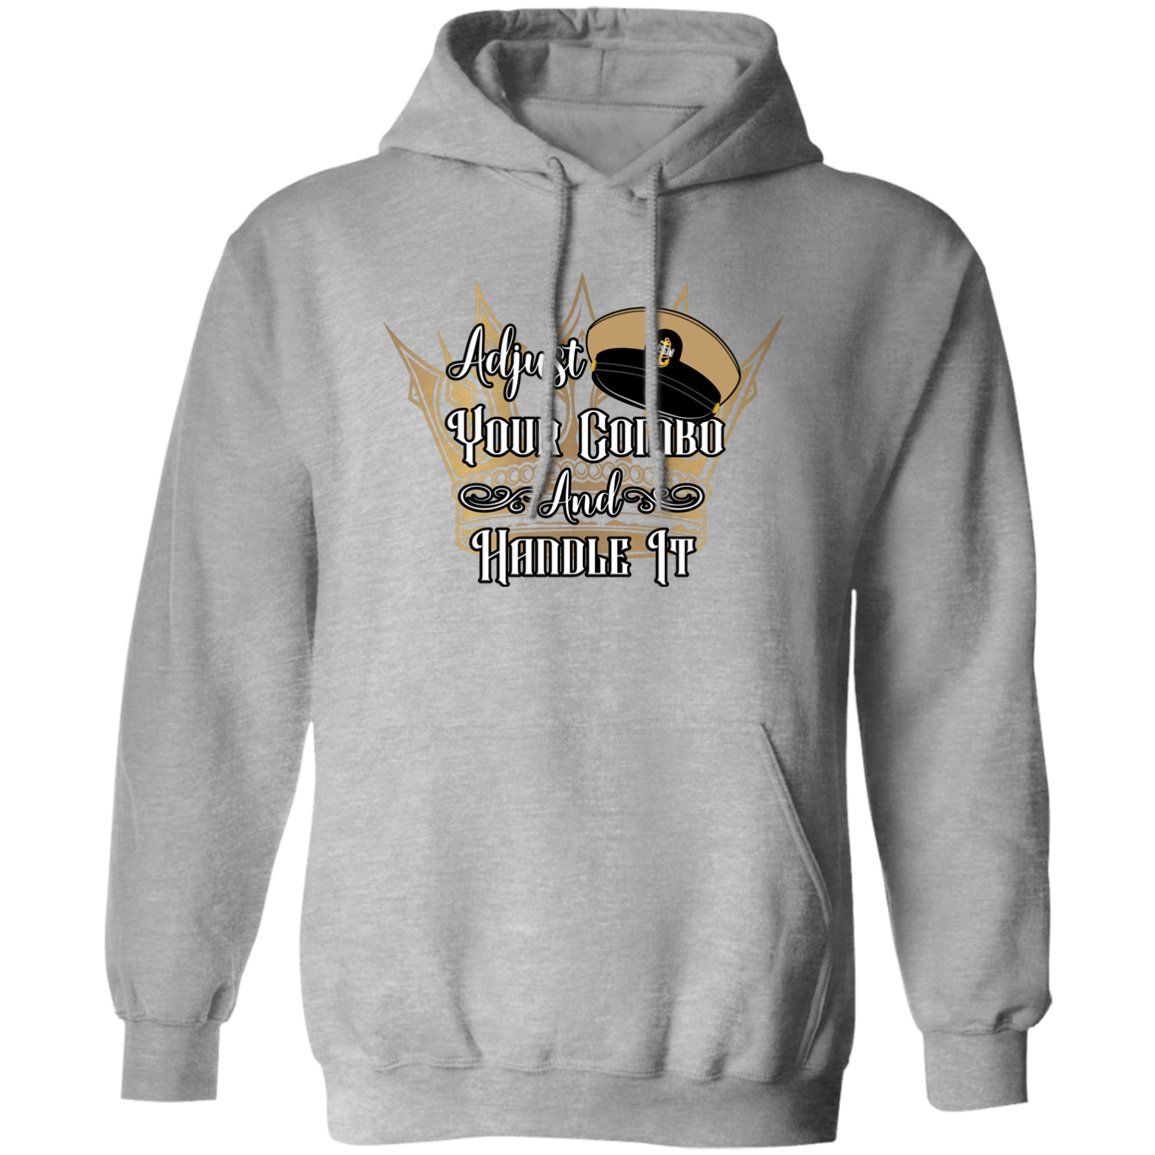 Adjust Your Combo Pullover Hoodie